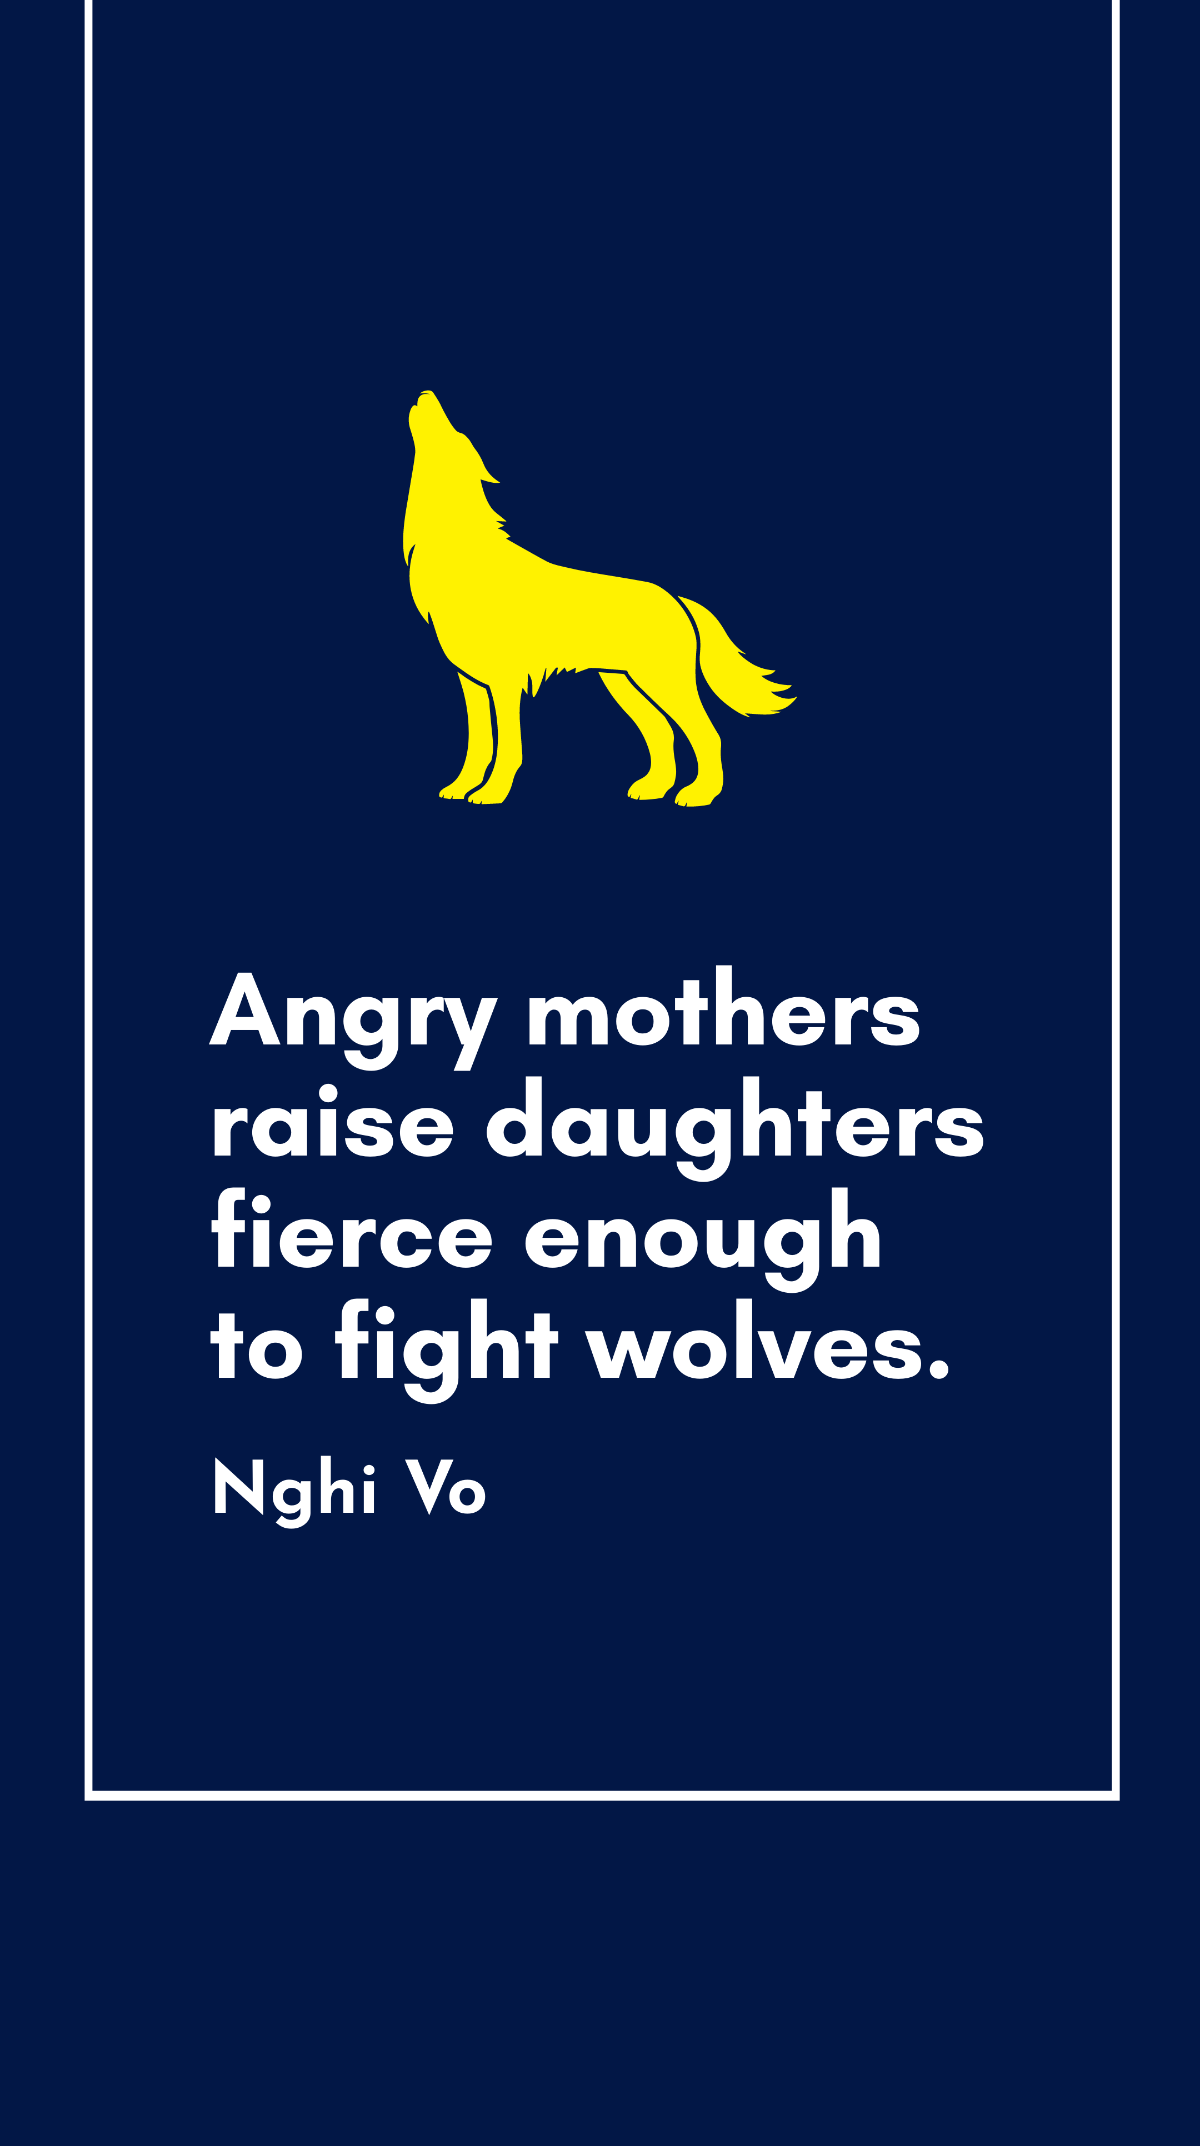 Free Nghi Vo - Angry mothers raise daughters fierce enough to fight wolves. Template